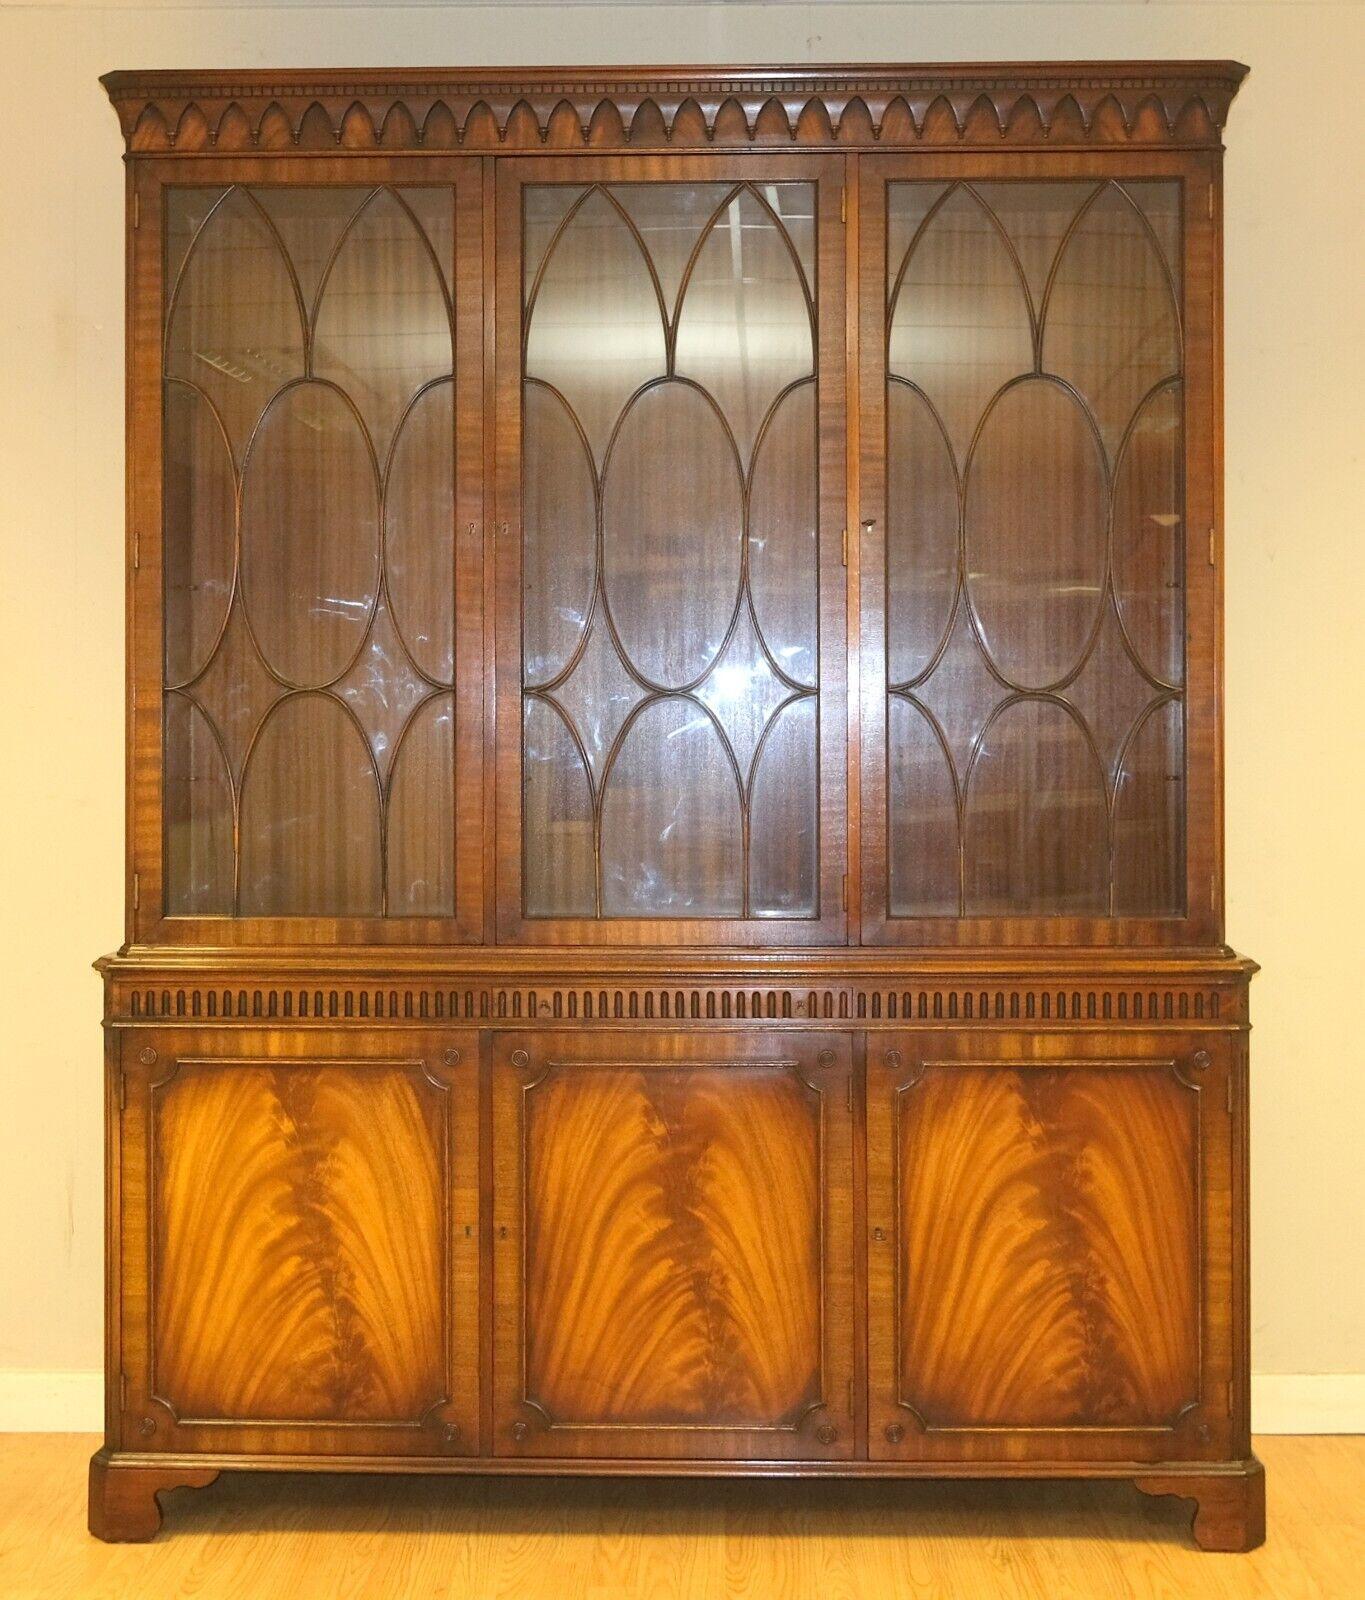 We are delighted to offer for sale this stunning Bevan Funnell Reprodux brown hardwood cupboard/cabinet glazed door.

A well made, sturdy and rich Mahogany colour with a good looking cabinet from the well known British furniture maker, Bevan